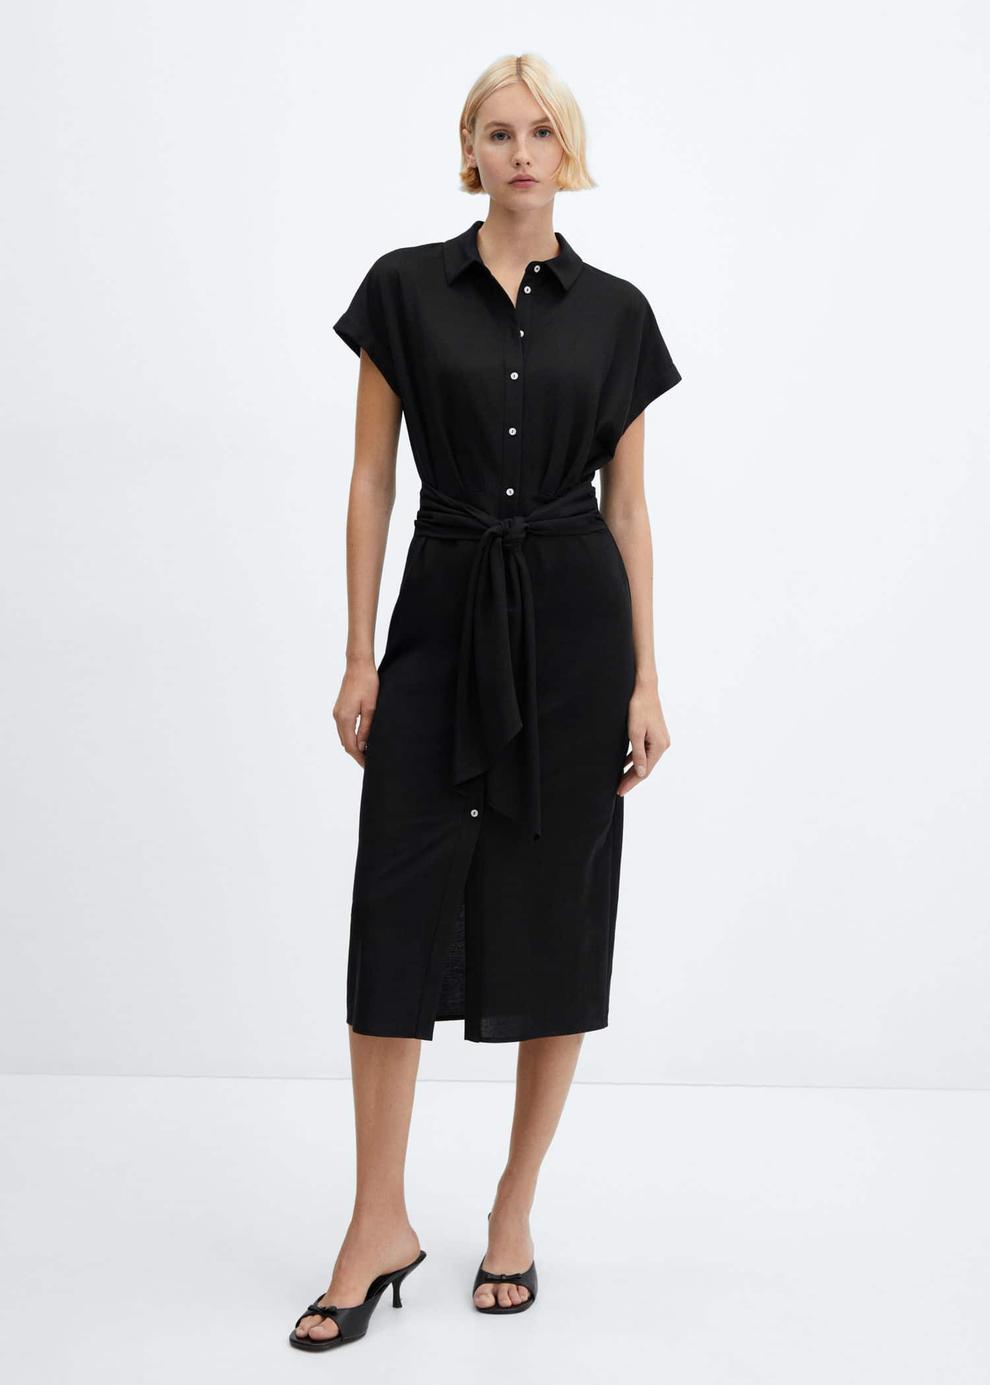 Bow shirt dress offers at S$ 64.9 in Mango